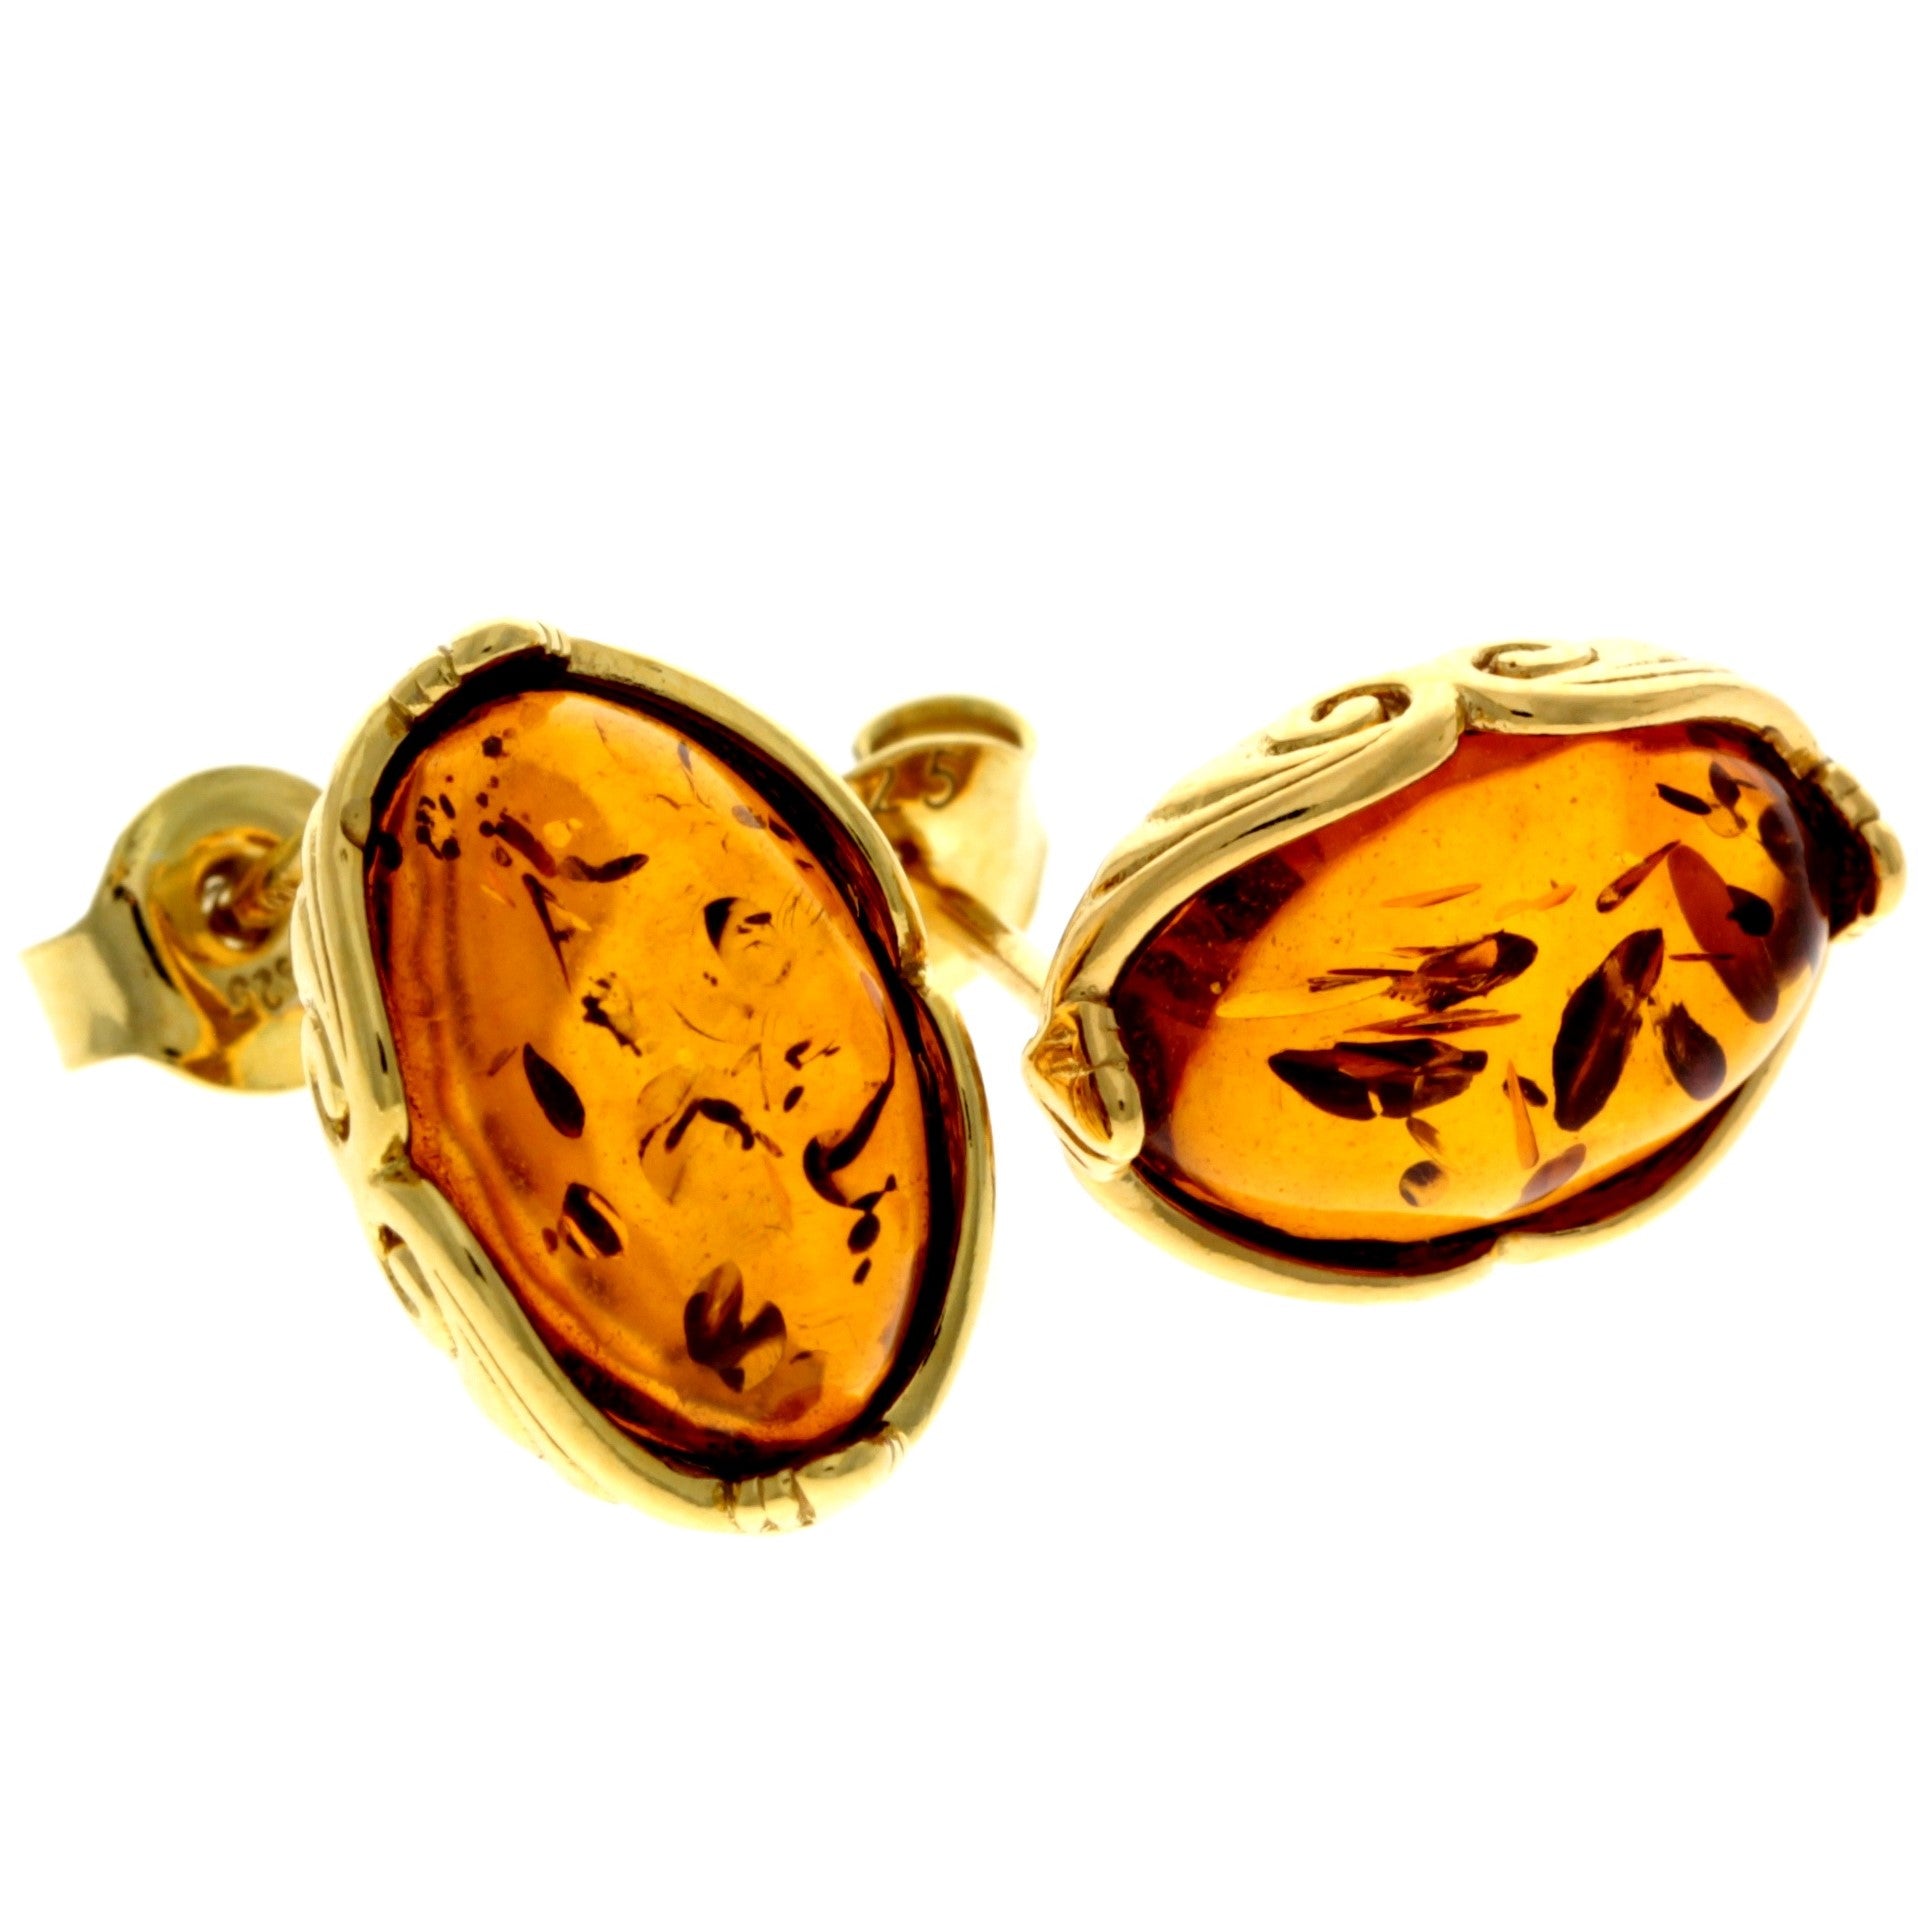 Genuine Baltic Amber and 925 Sterling Silver Gold Plated with 1 micron of 22 carat gold Studs Earrings - MG010